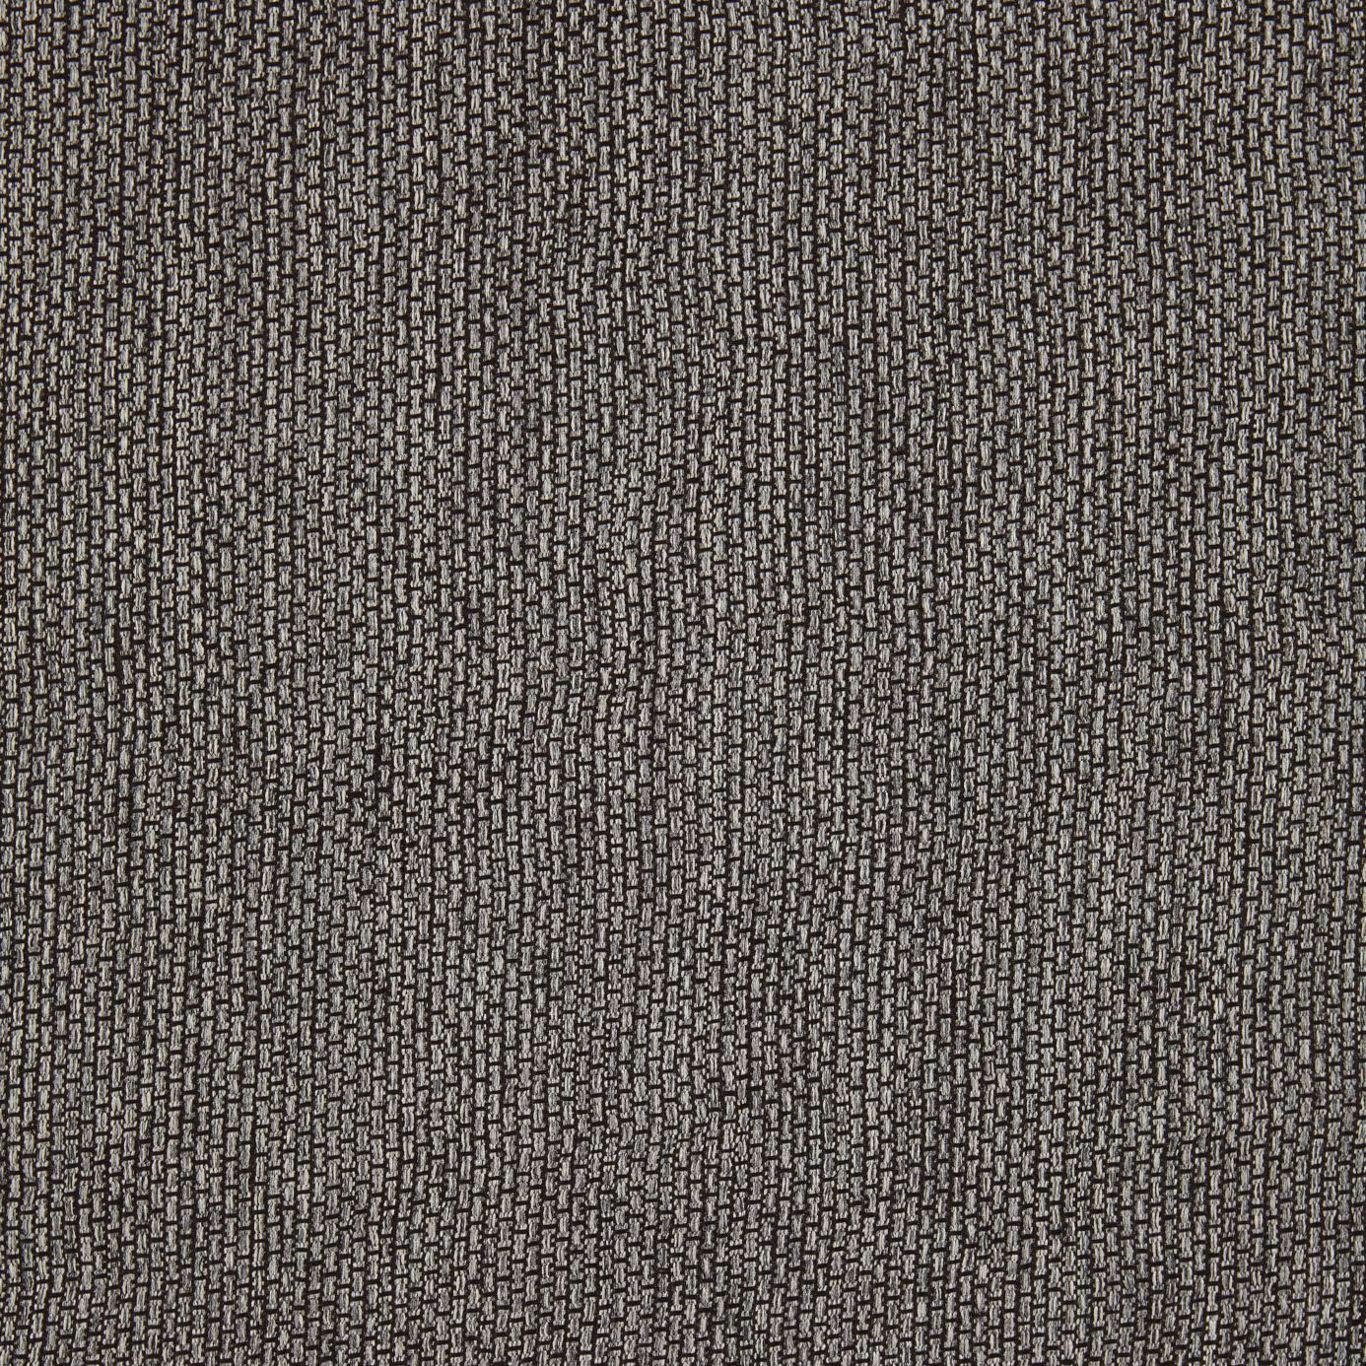 Anthology Jute Charcoal/Silver Fabric by HAR